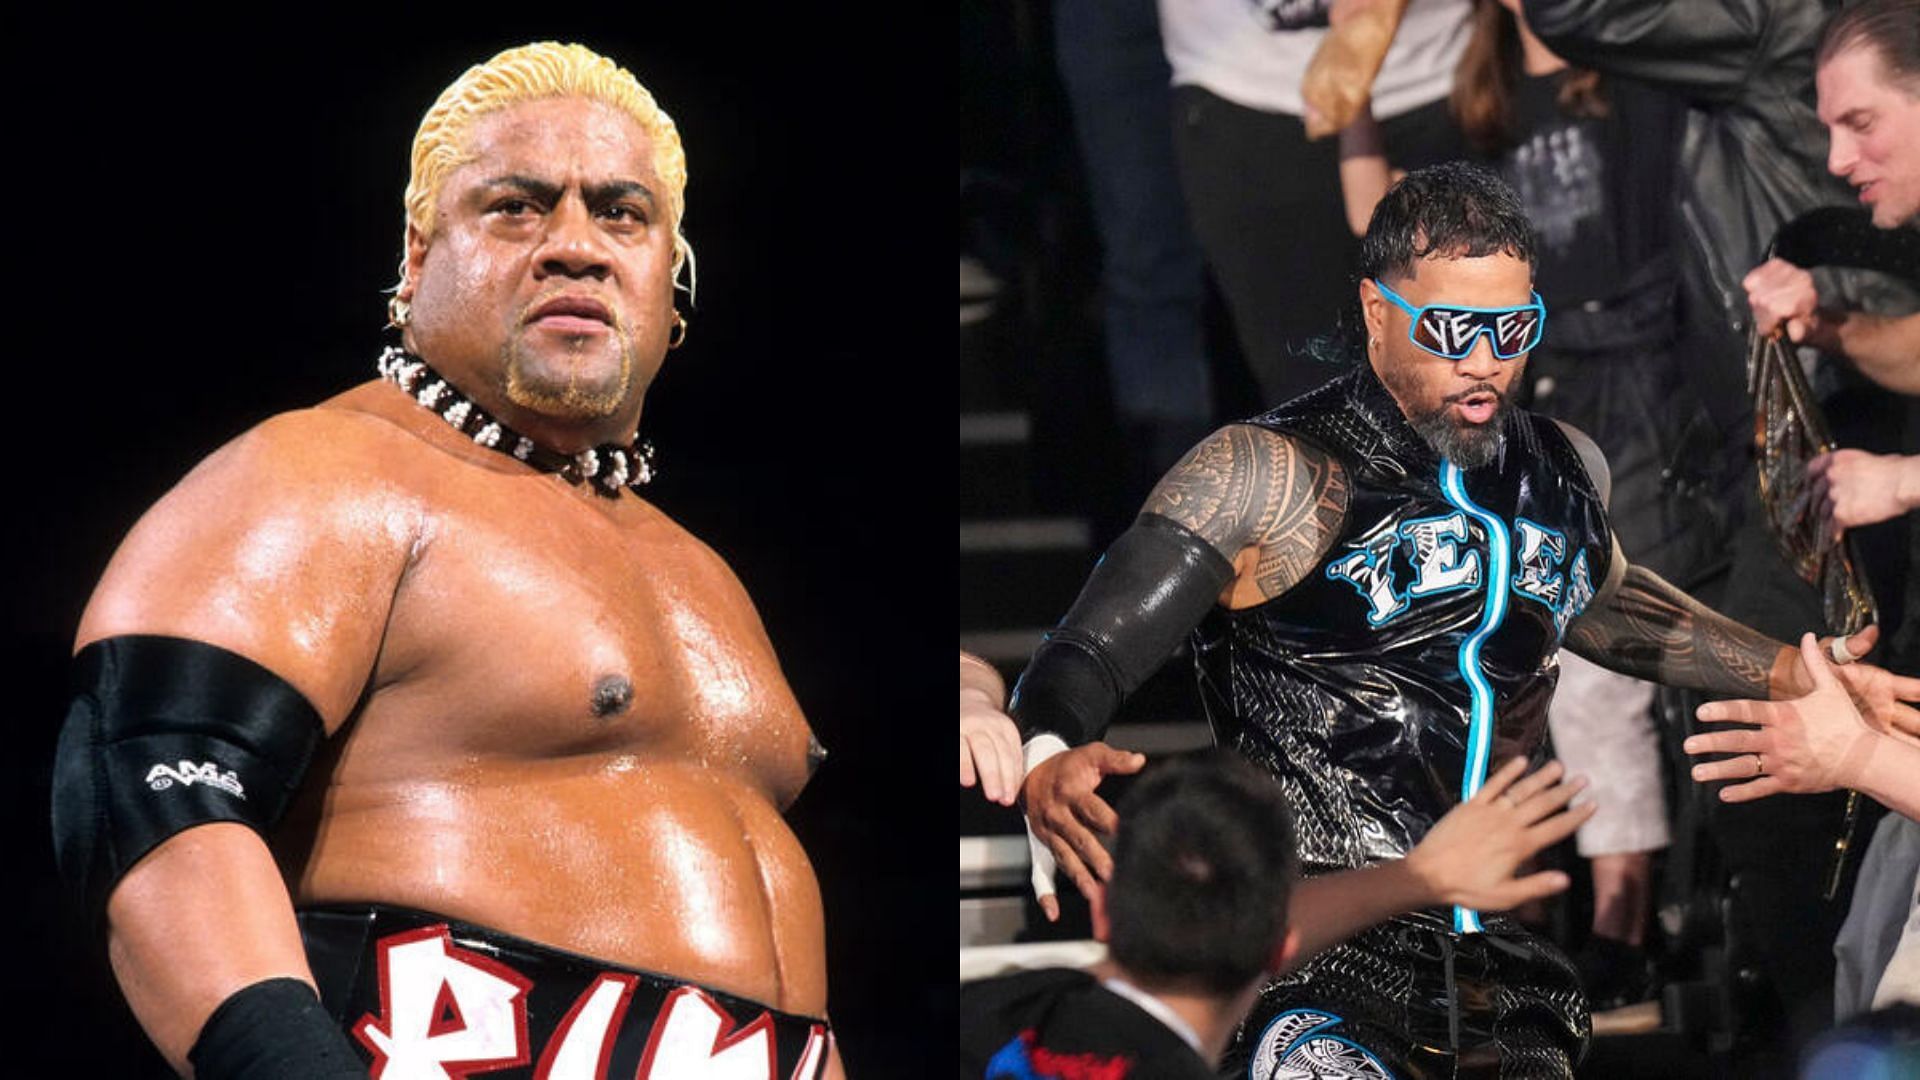 Rikishi (left) and Jey Uso (right)